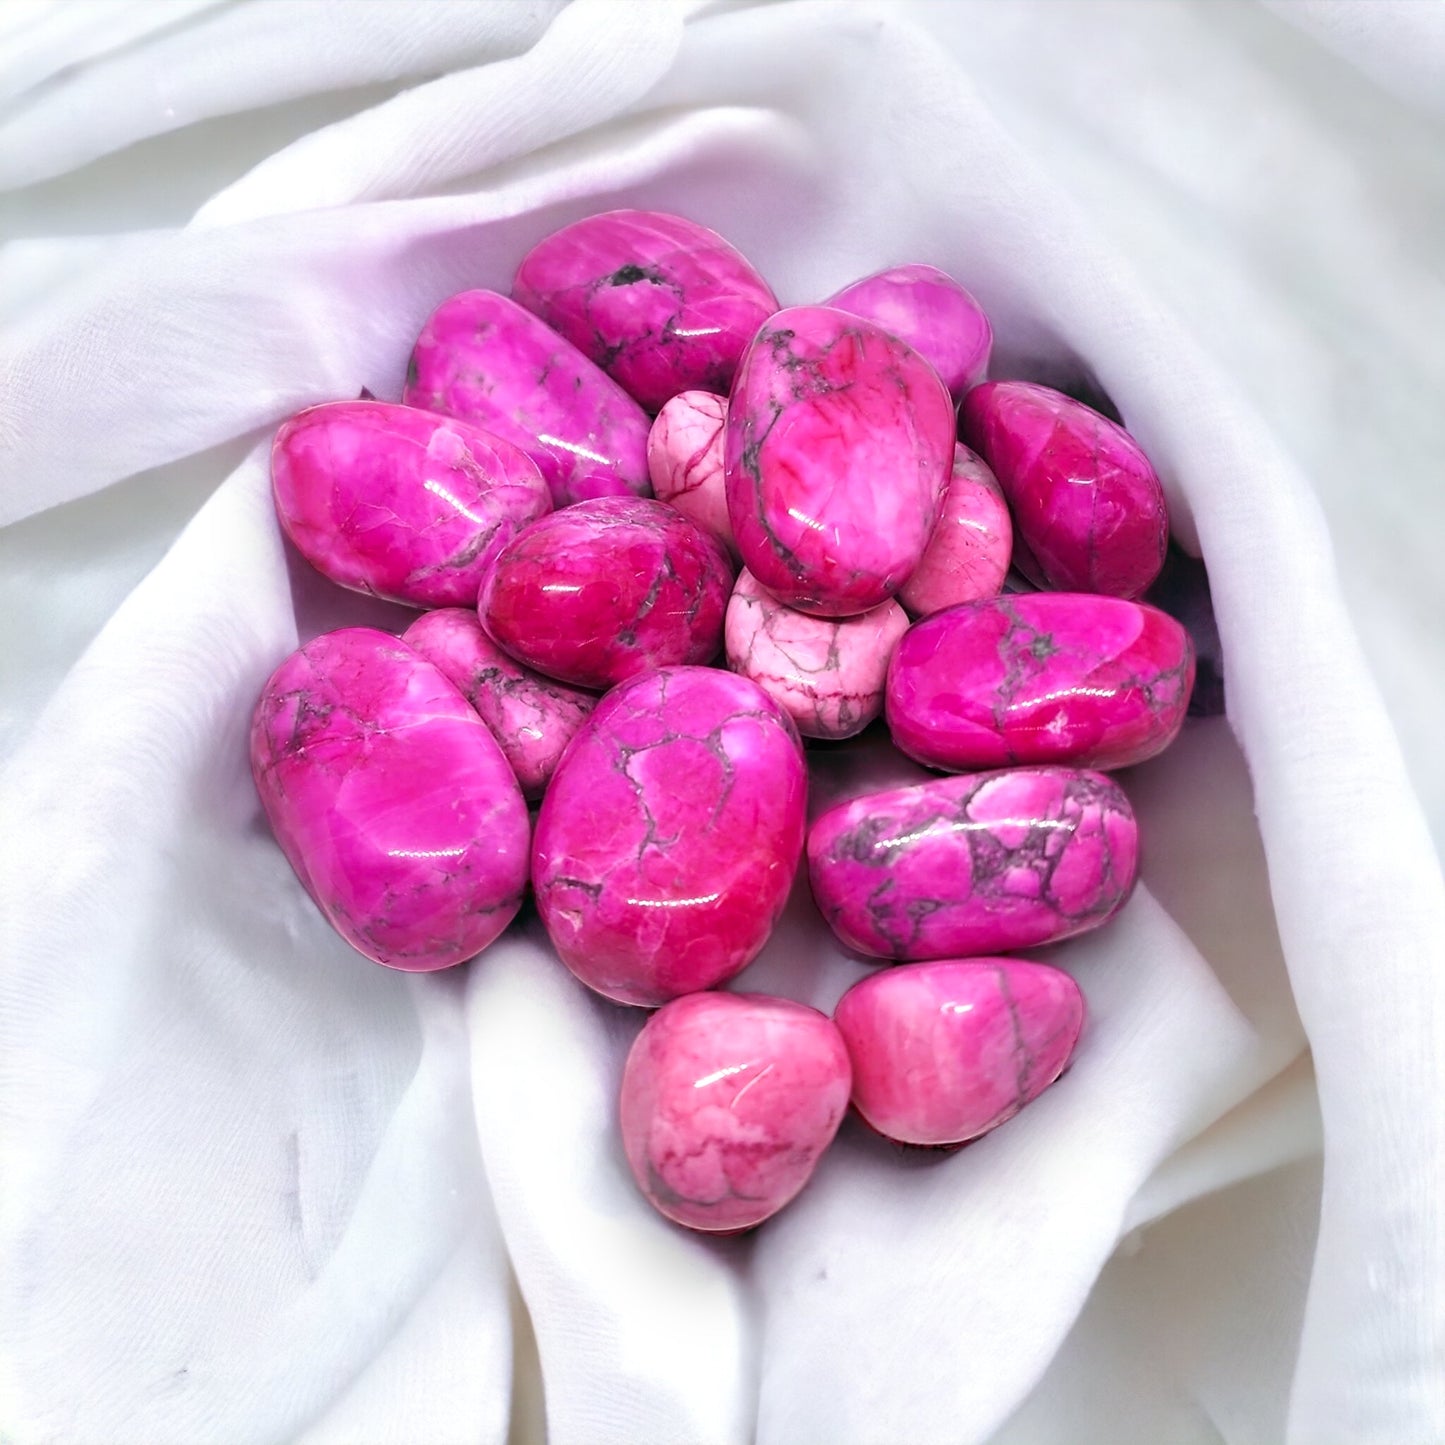 pink howlite crystal tumbles sold at mind soul sync crystal shop in Australia. Howlite crystals.